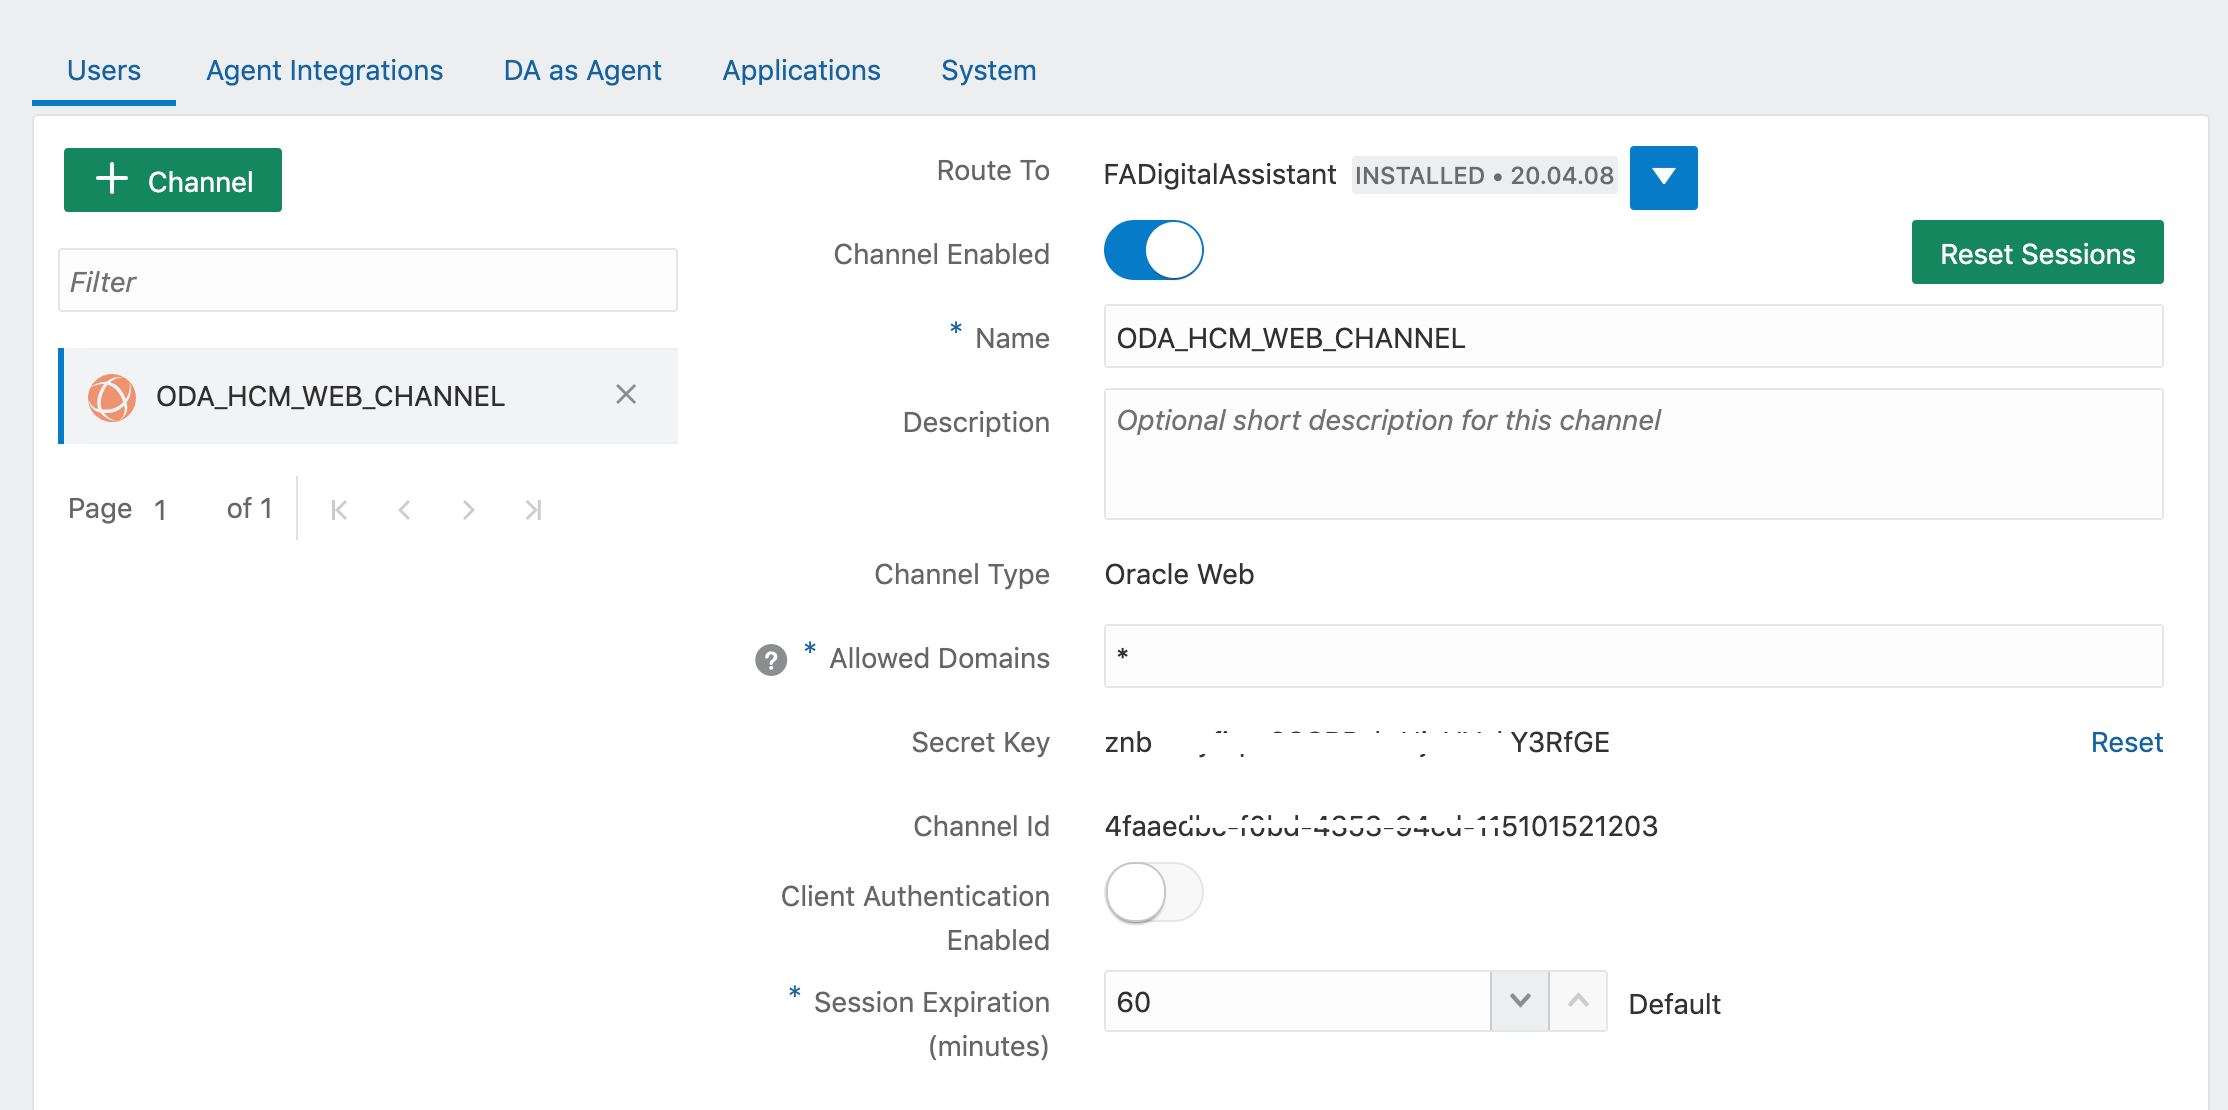 Screenshot of the Users tab of the Channels page in Oracle Digital Assistant. The ODA_HCM_WEB_CHANNEL channel is selected.